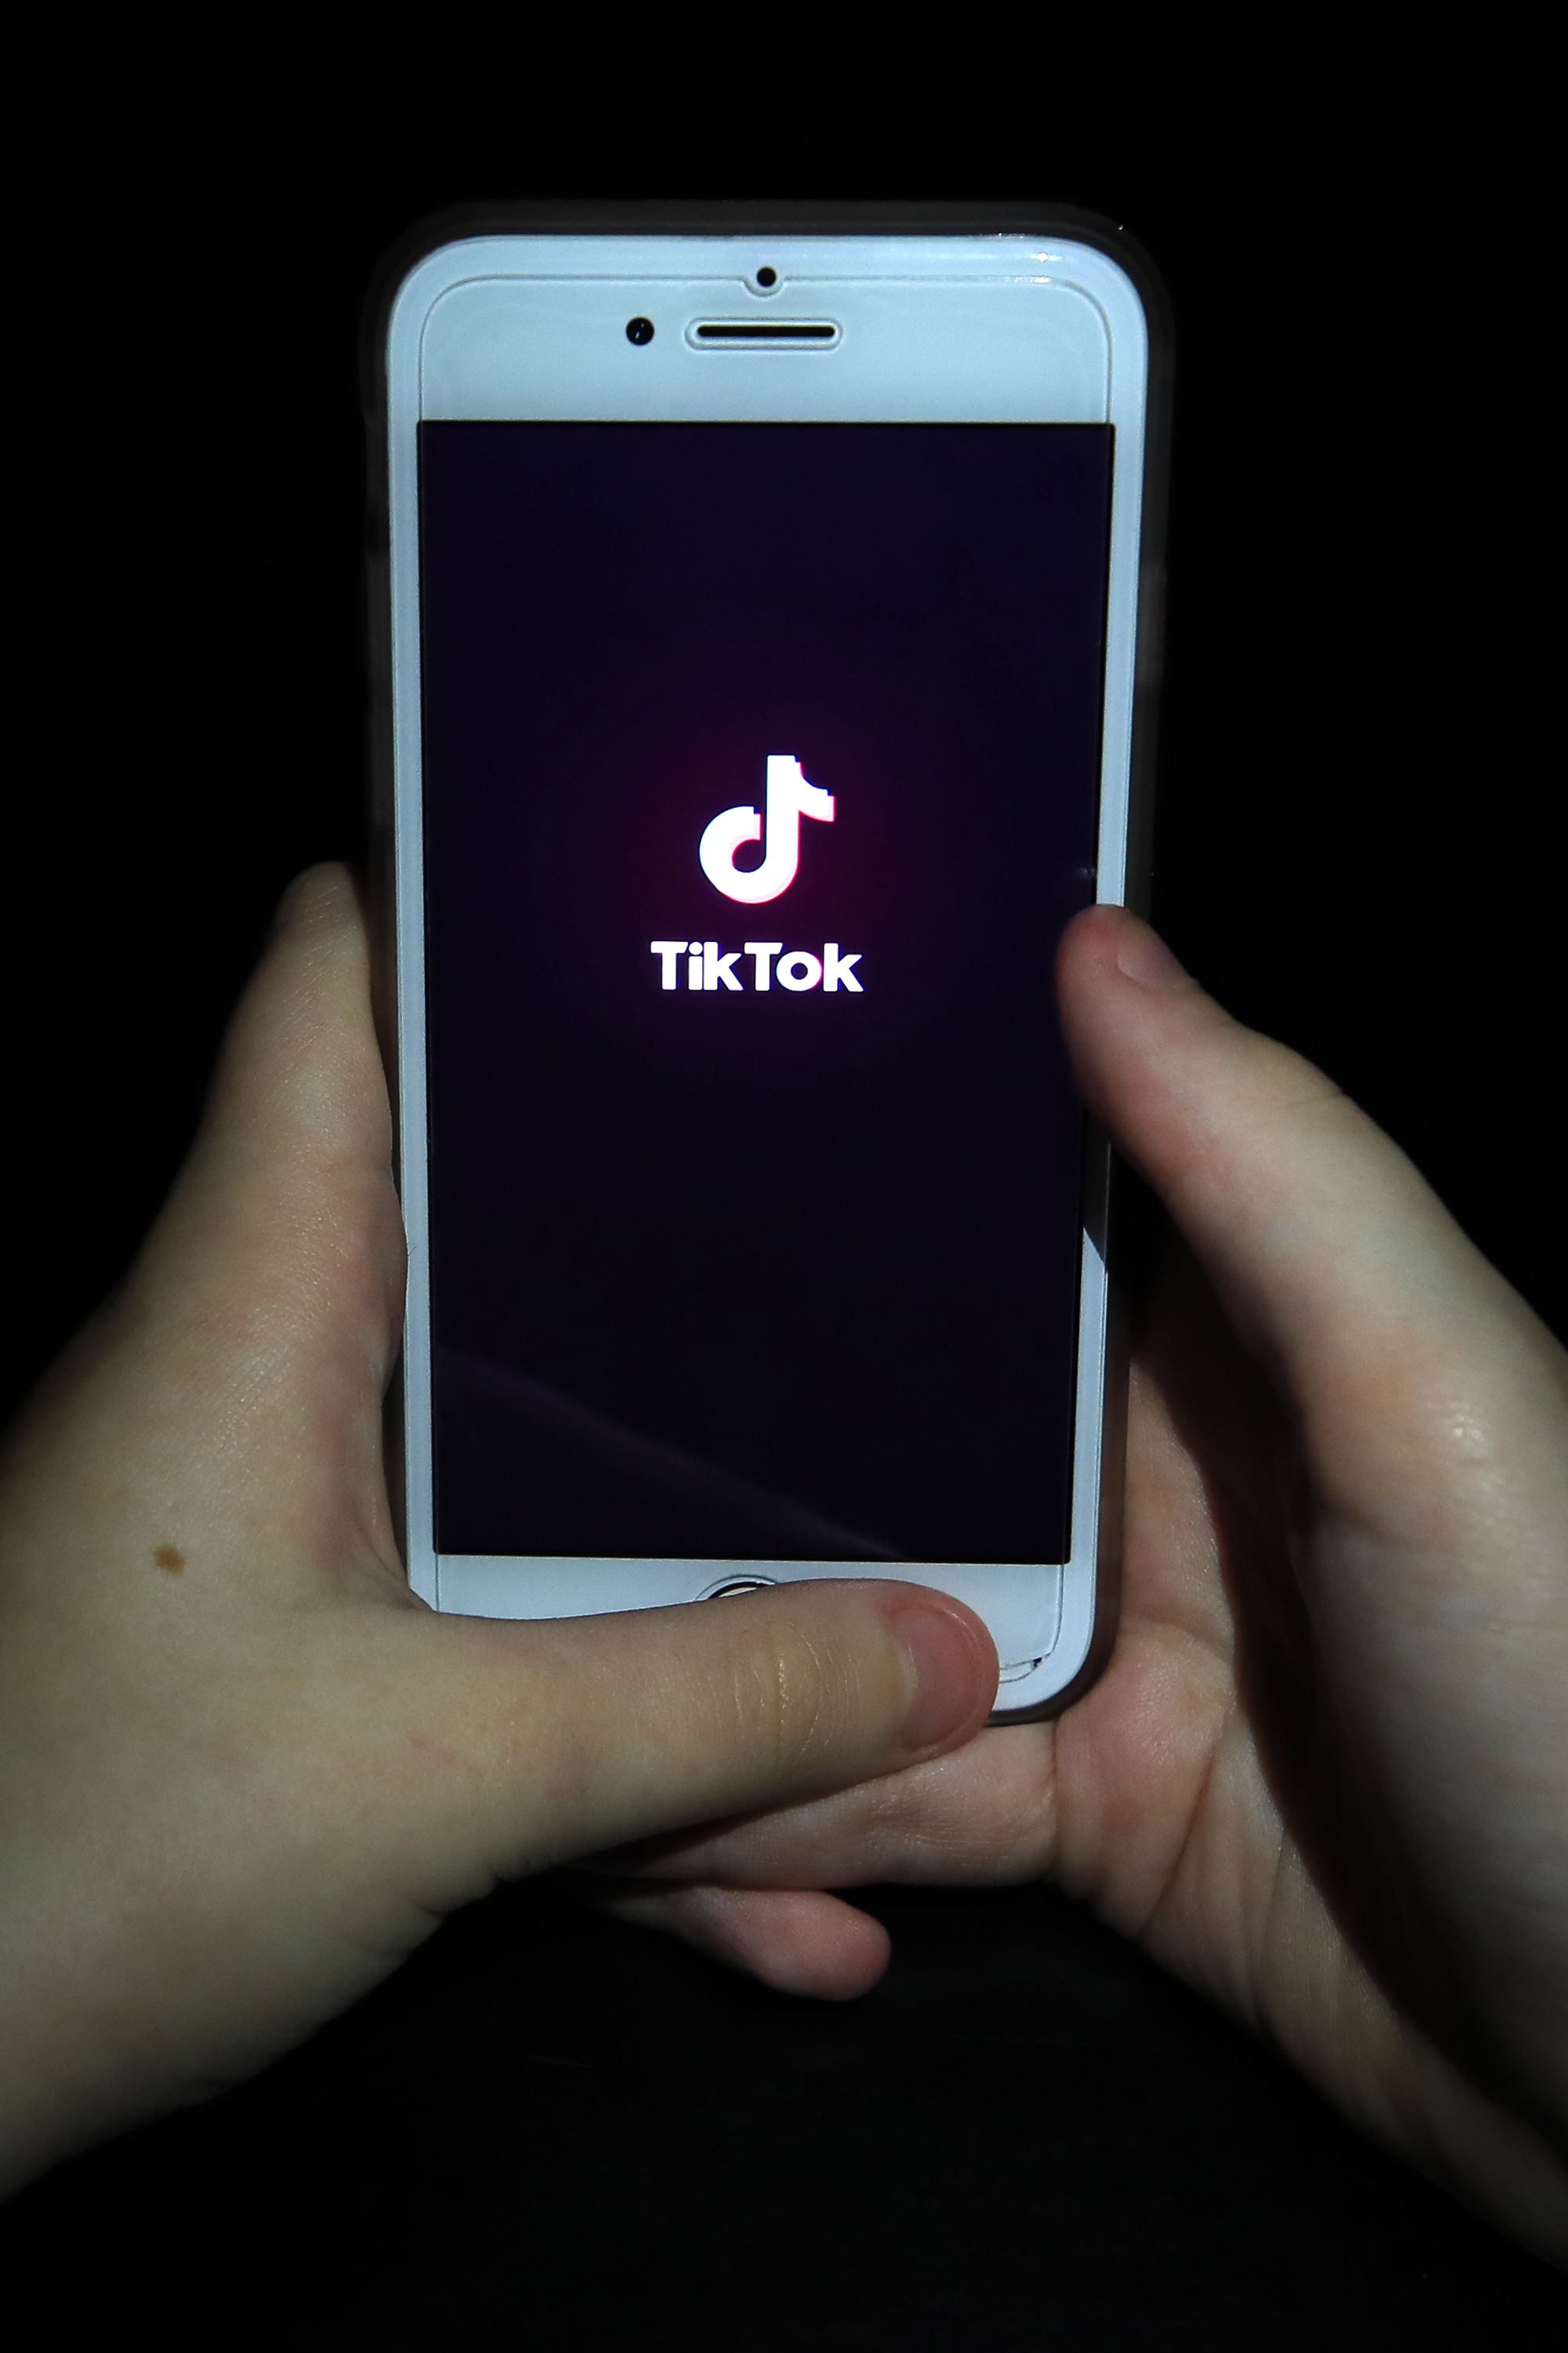 tiktok removes 80m under-age accounts per year, committee told